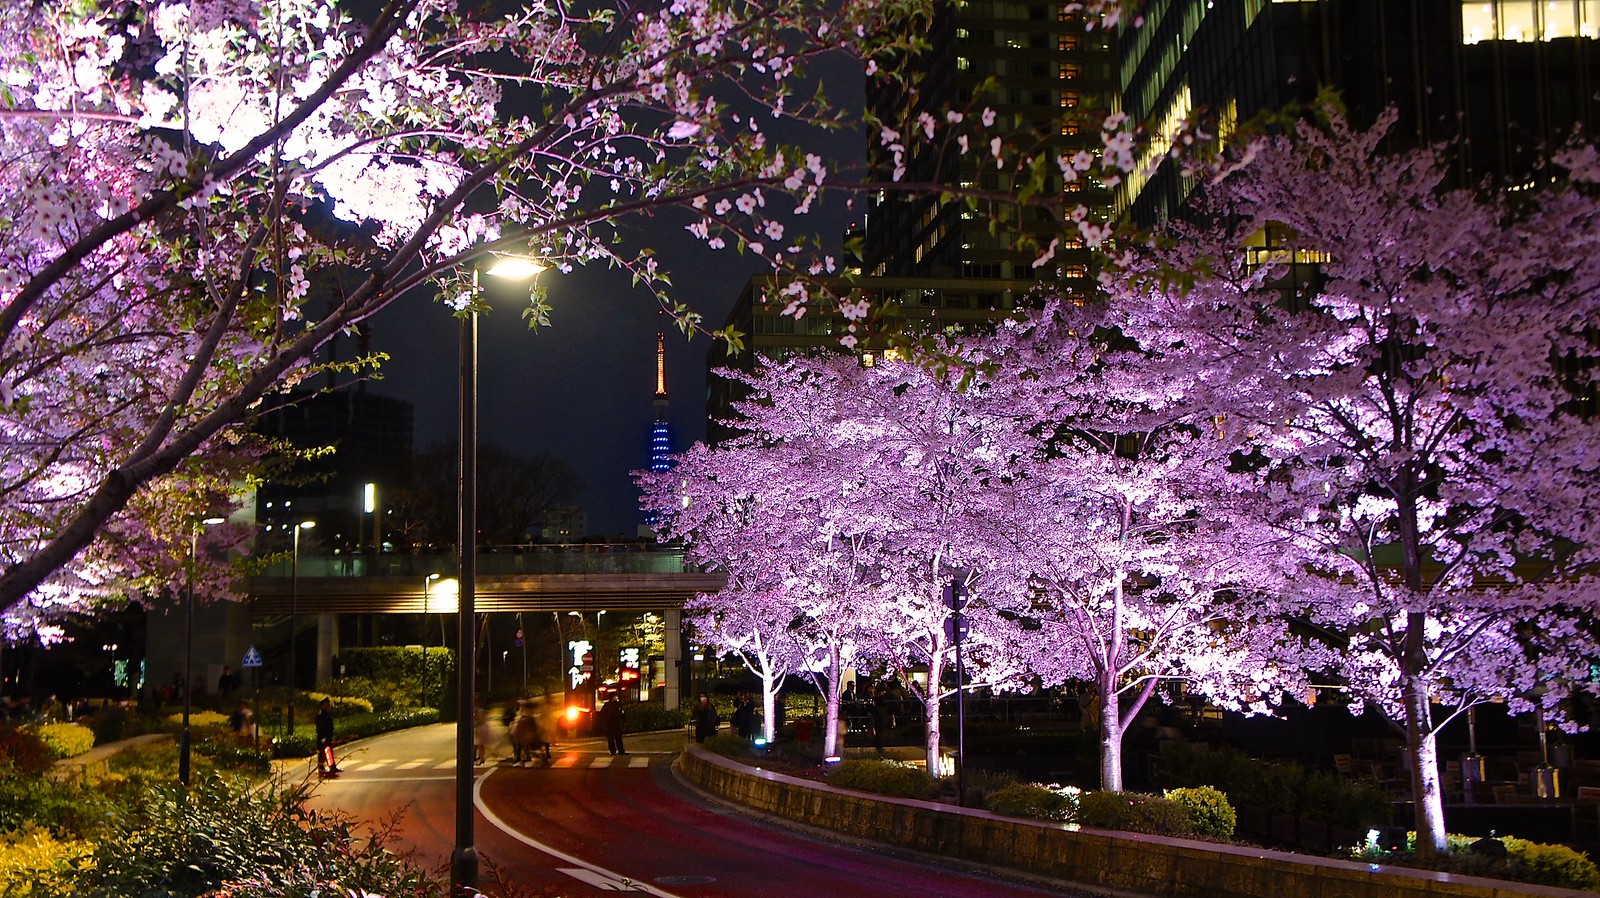 Tokyo Midtown Cherry Blossoms, the good an the bad by Manish Prabhune